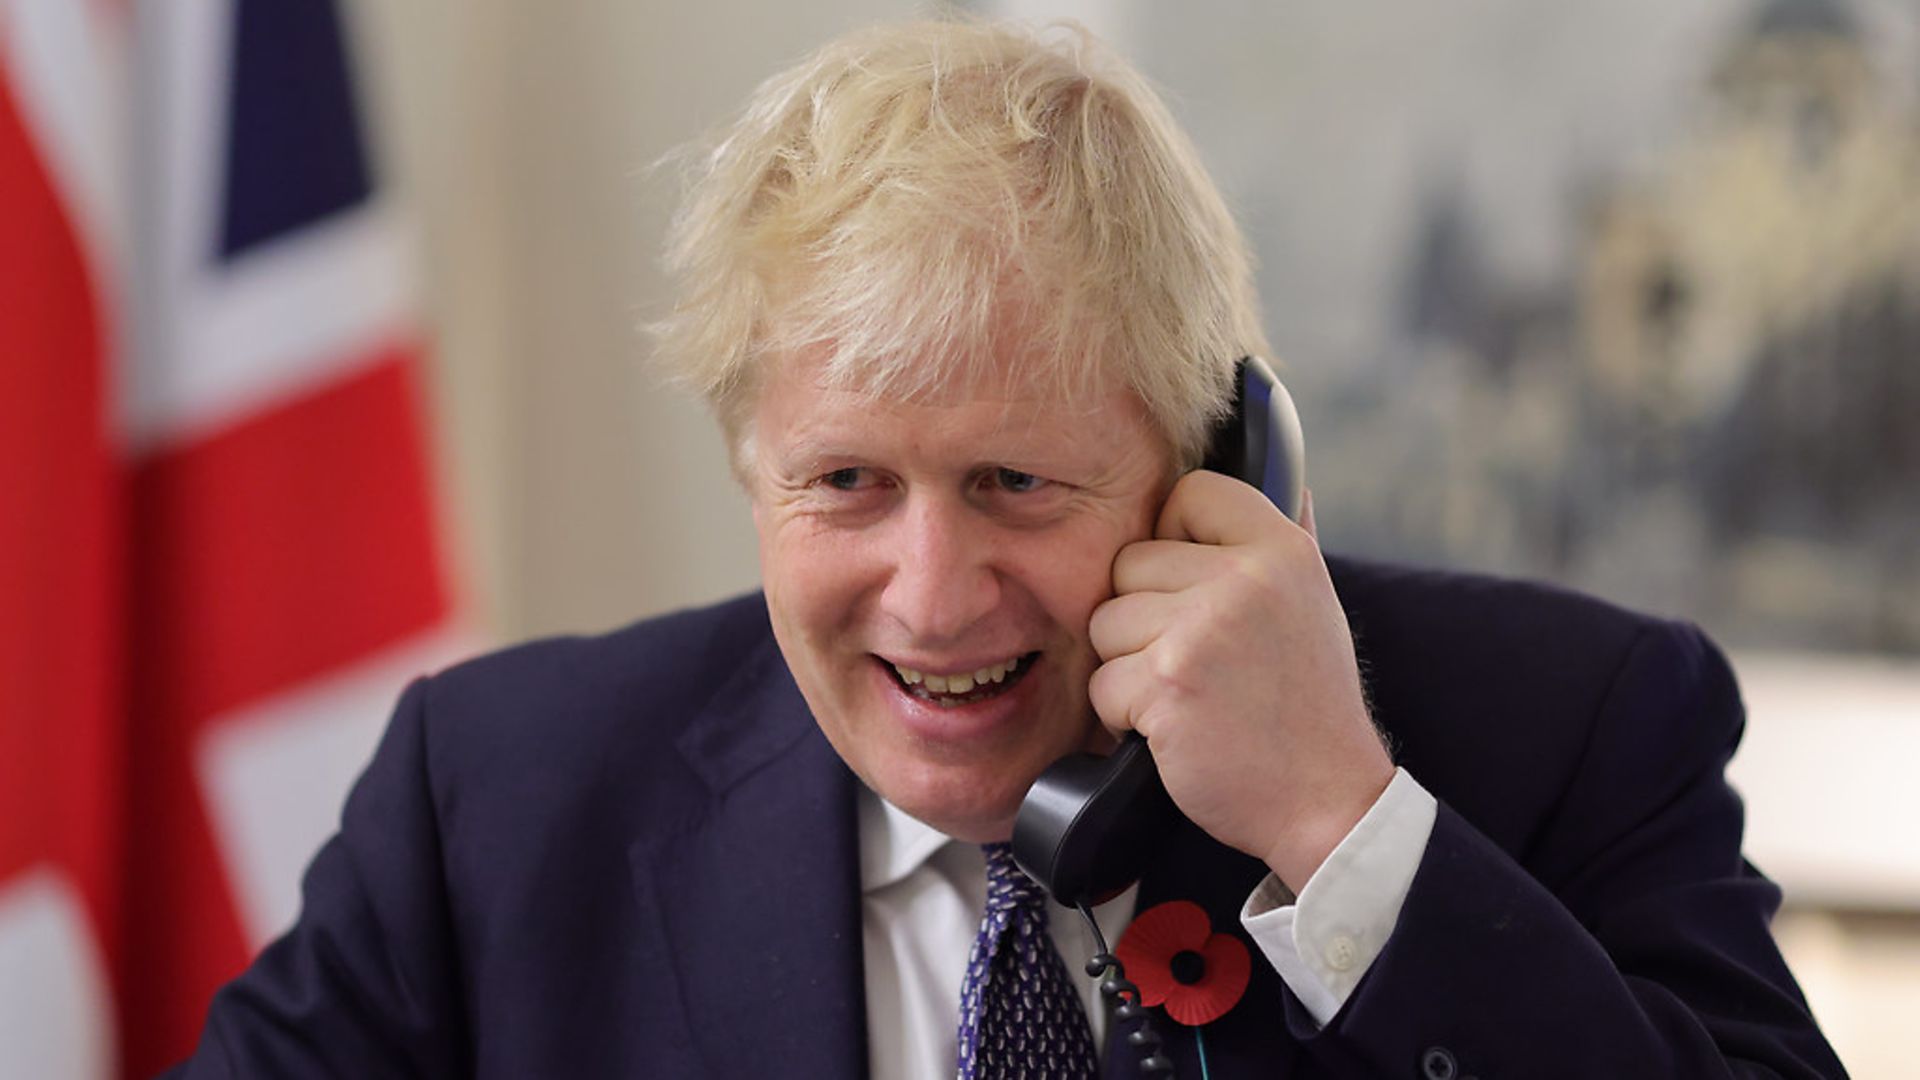 Boris Johnson on the phone in Downing Street - Credit: Andrew Parsons/10 Downing Street